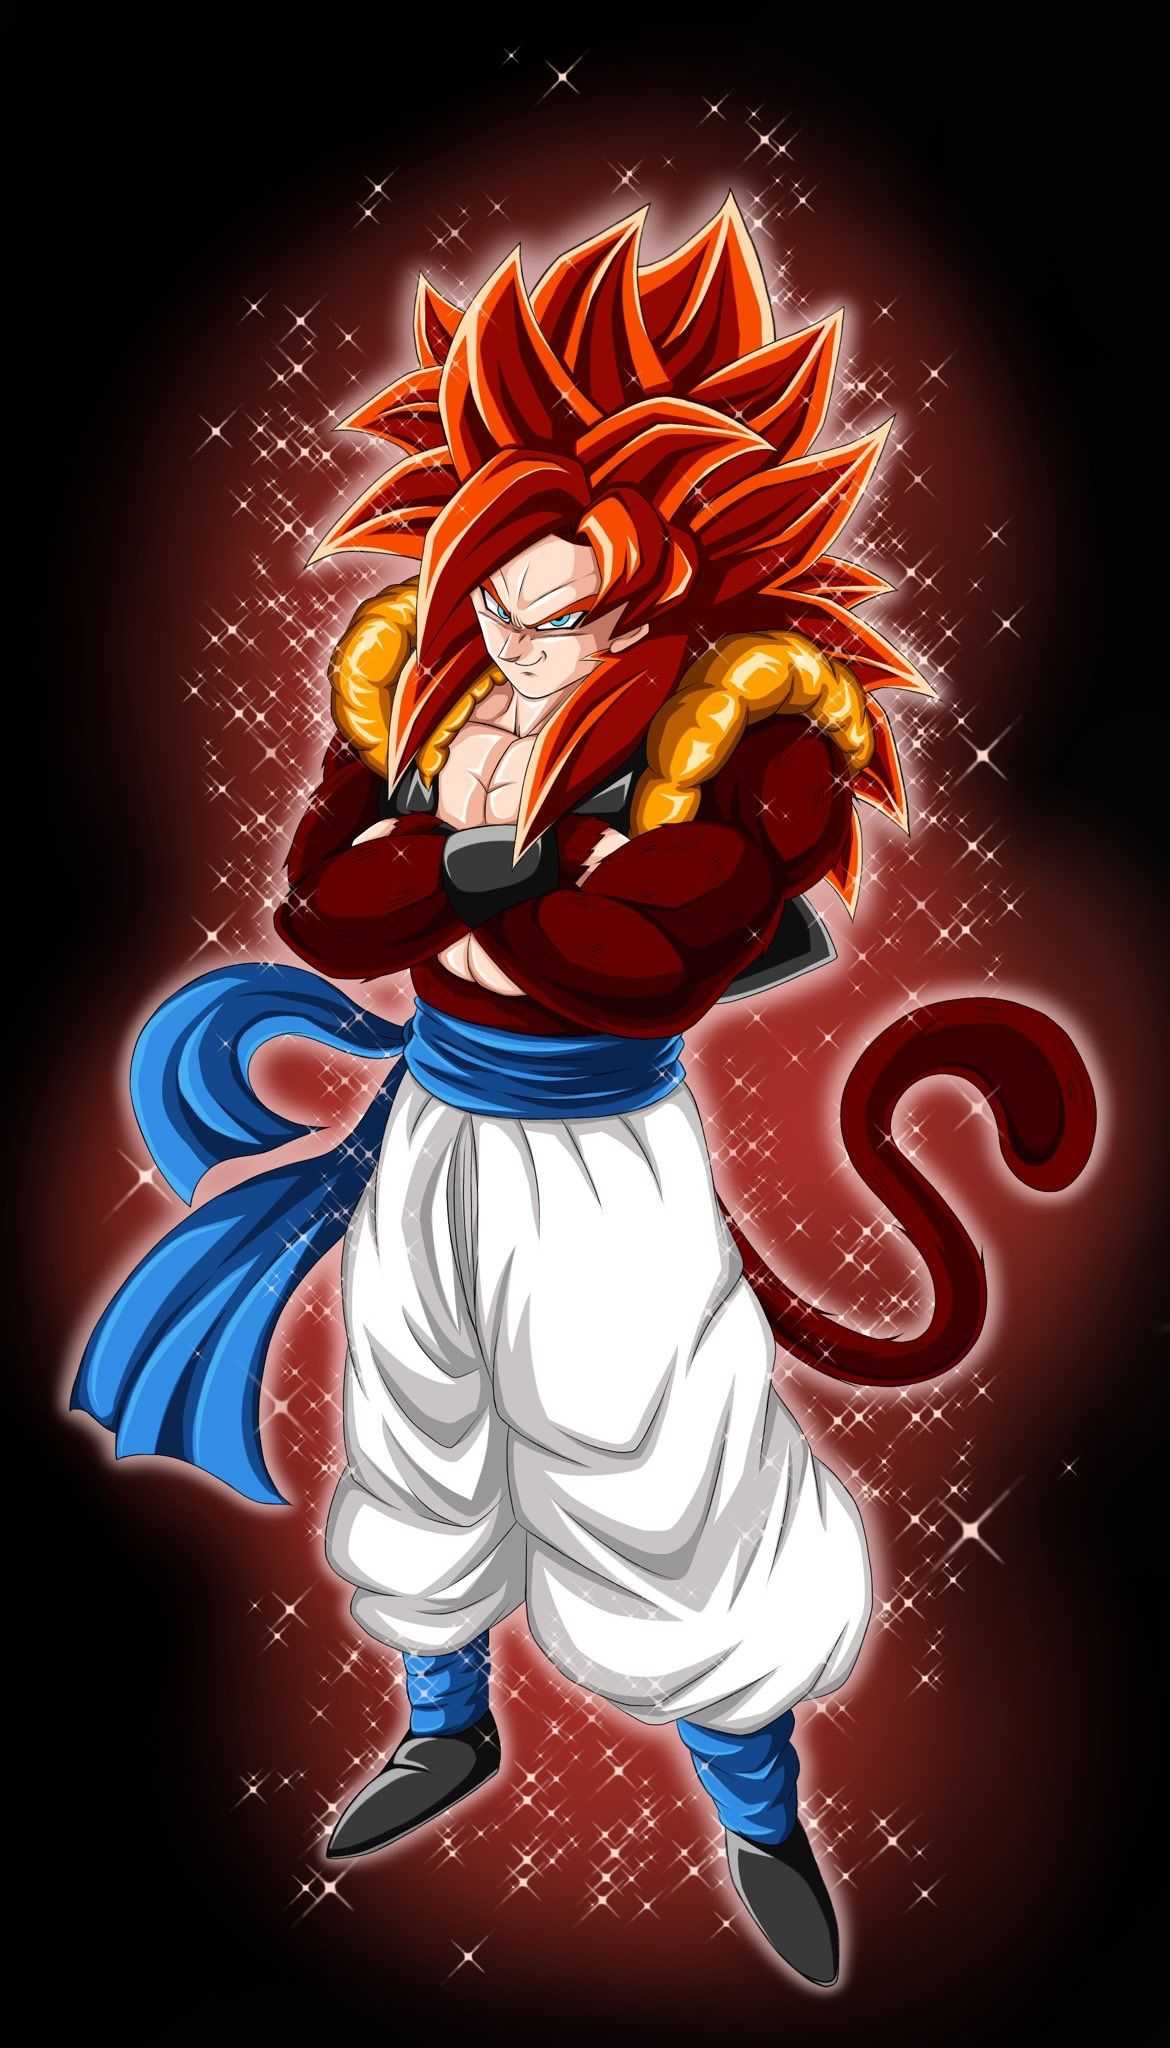 35+ Gogeta Wallpapers for iPhone and Android by James Gill